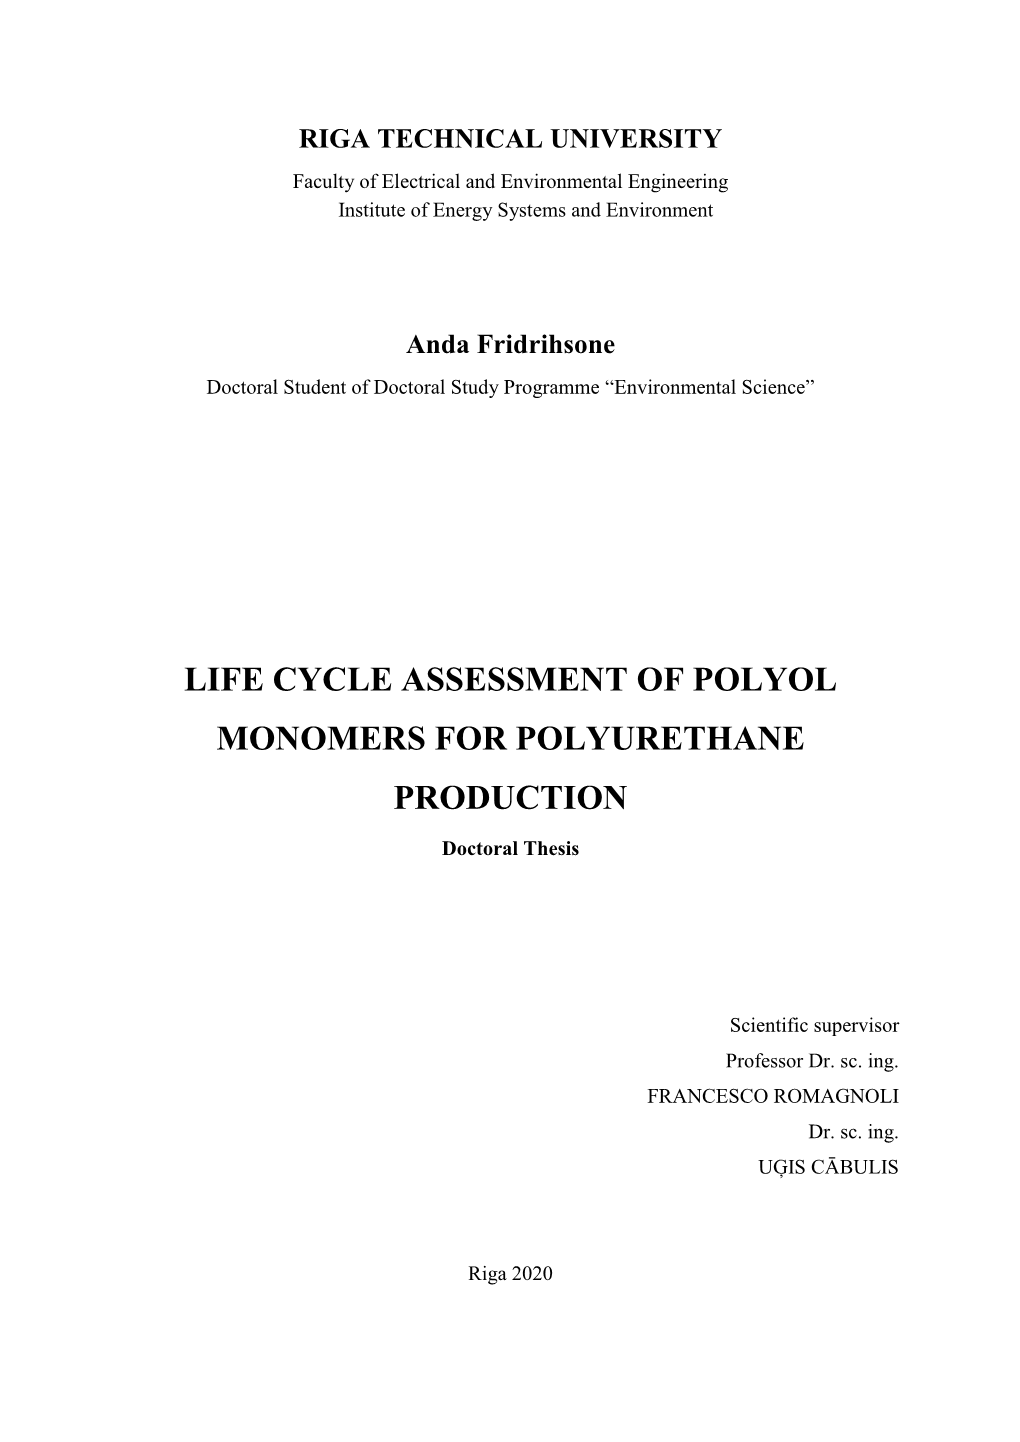 Life Cycle Assessment of Polyol Monomers for Polyurethane